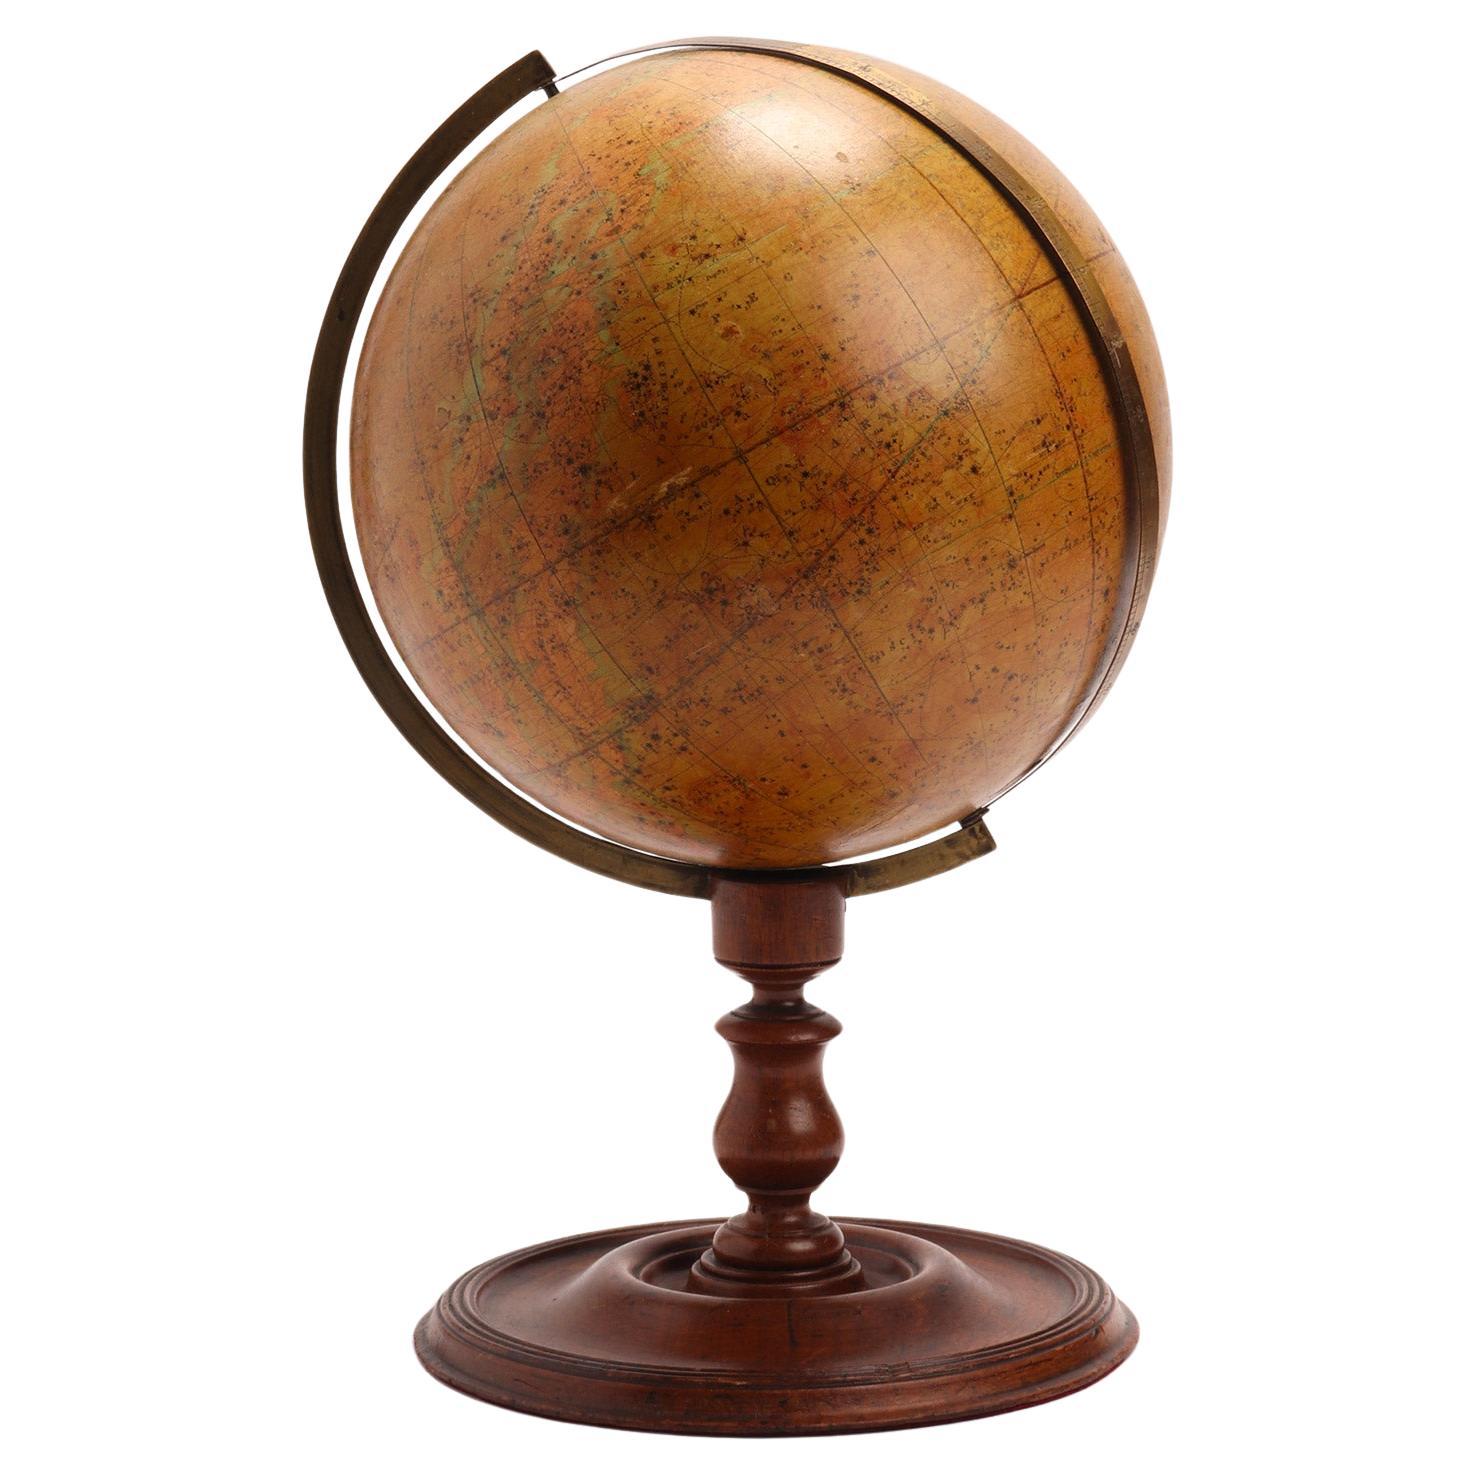 A rare celestial globe edited by J. Wyld, Charing Cross East London 1860.  For Sale